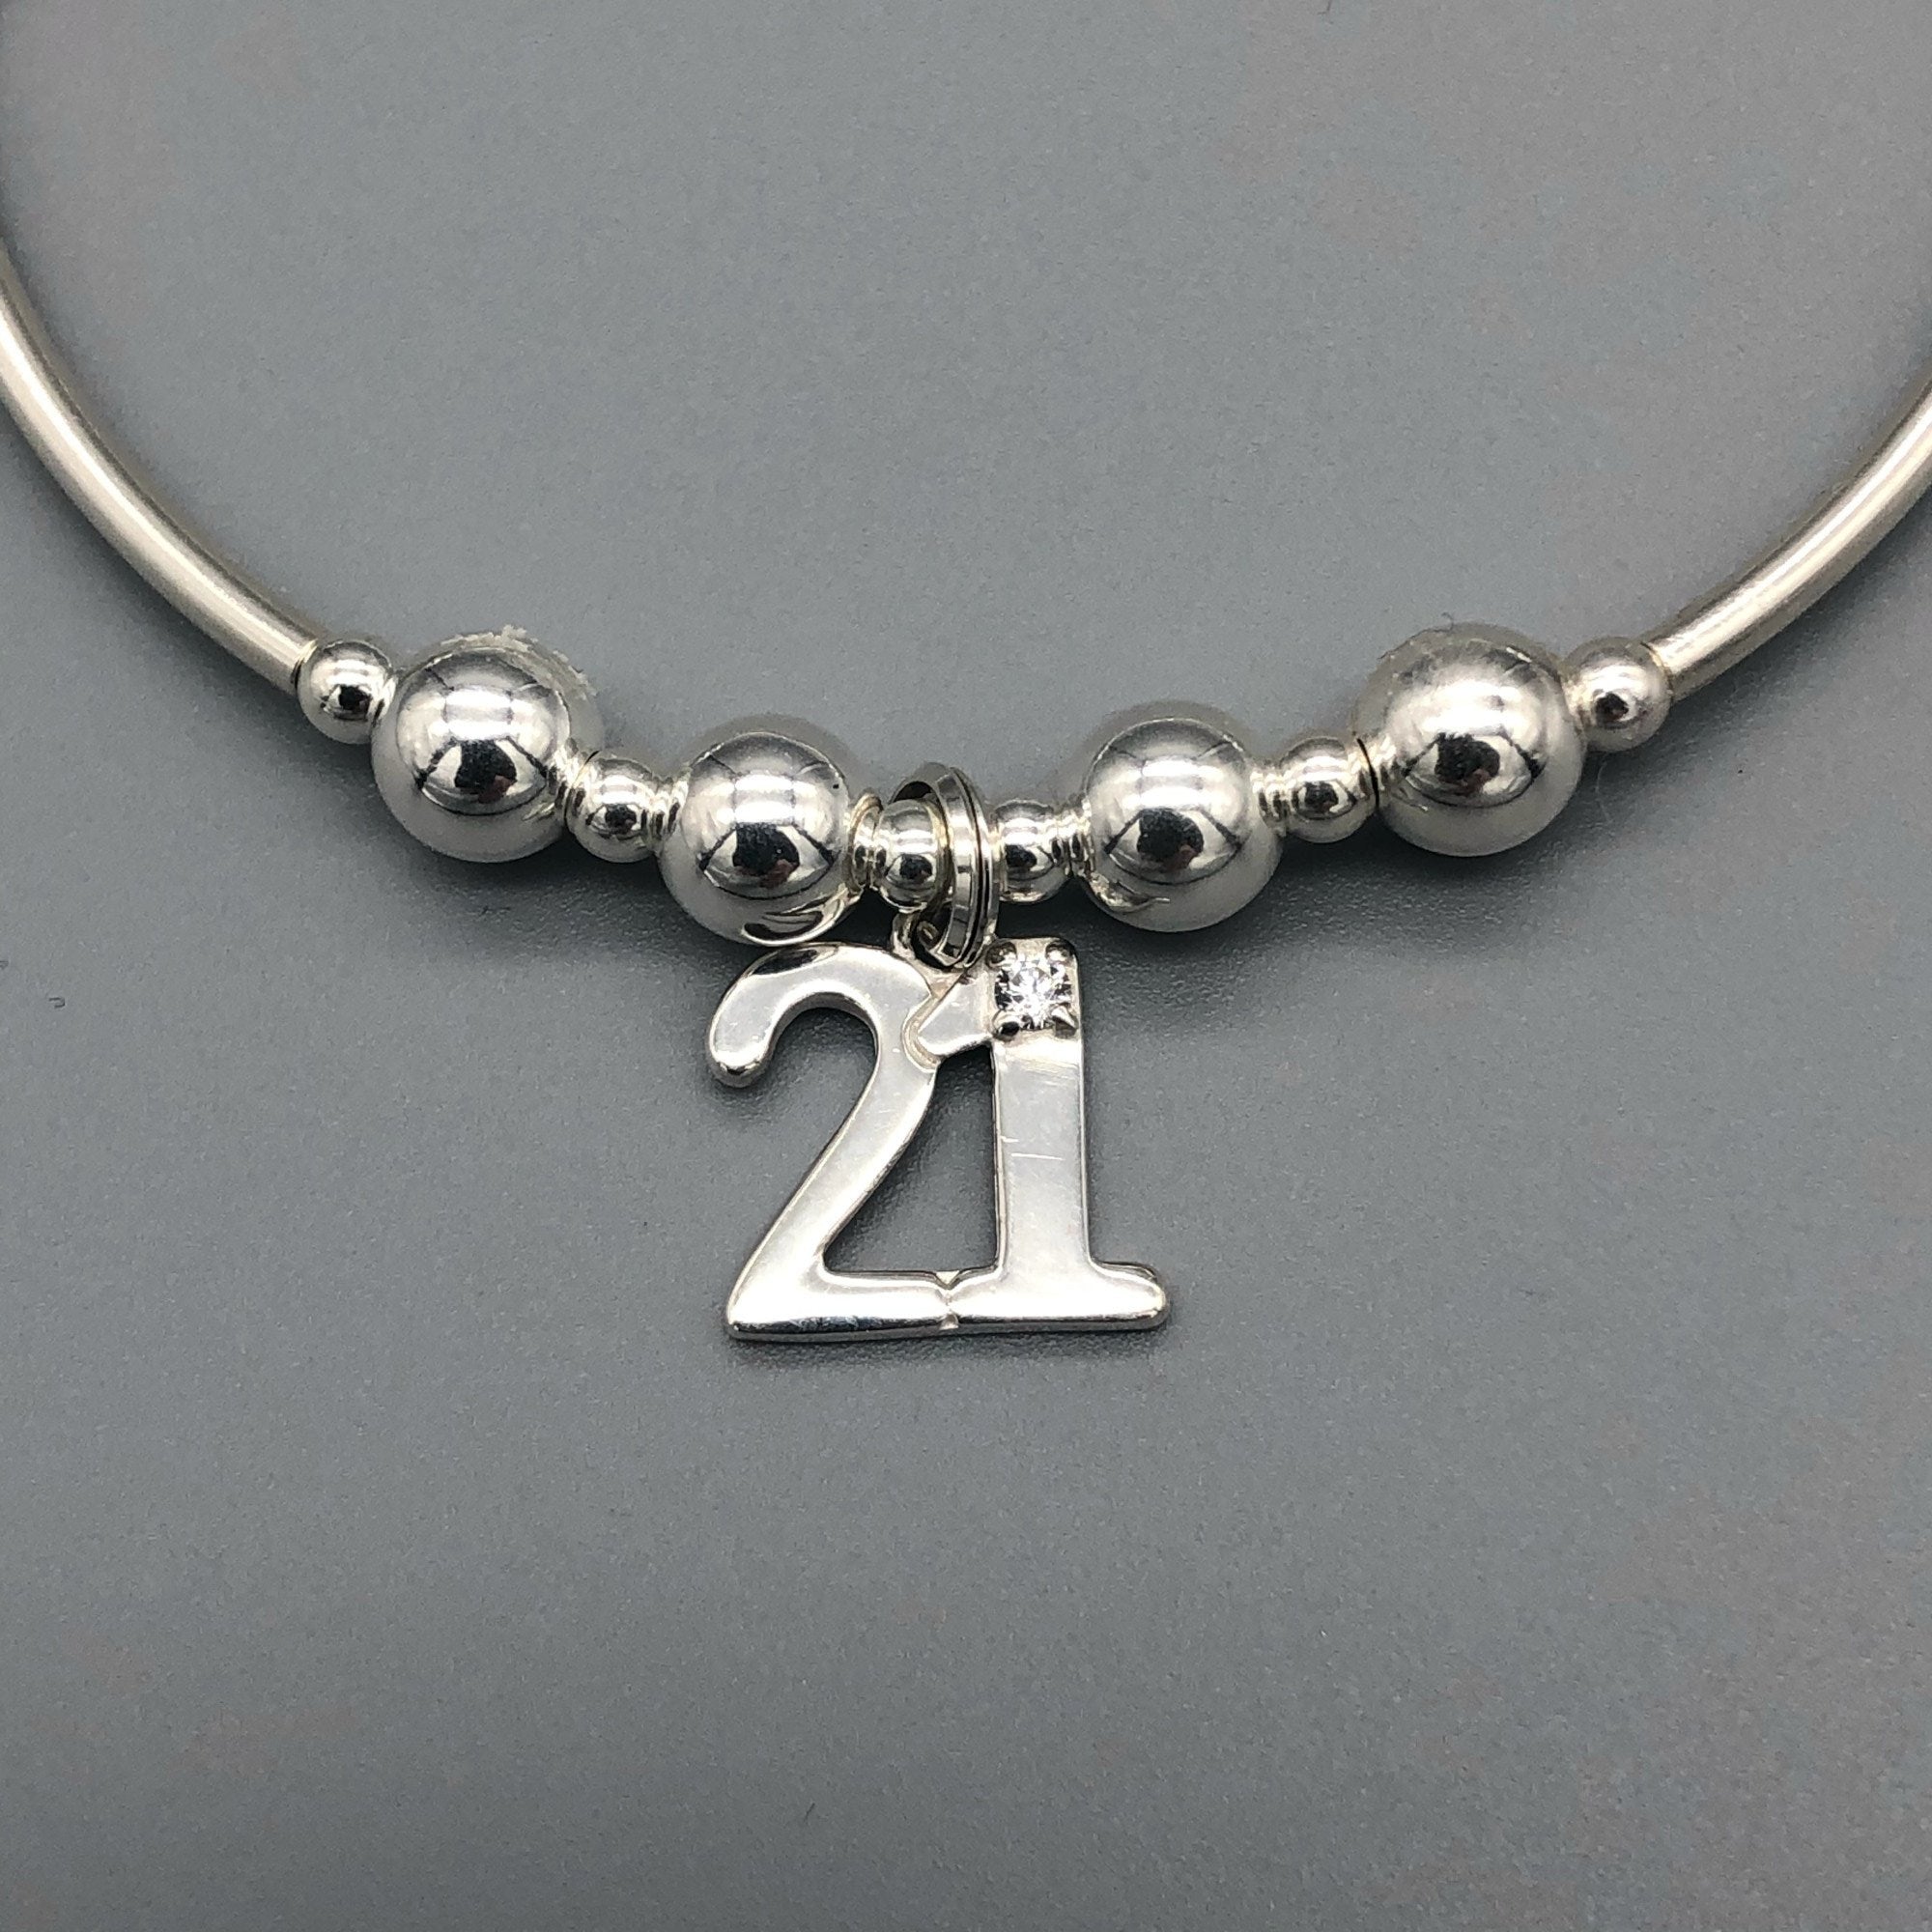 Age 21 'Birthday Wishes' Silver Plated Charm Bead Bracelet – Liberty Charms